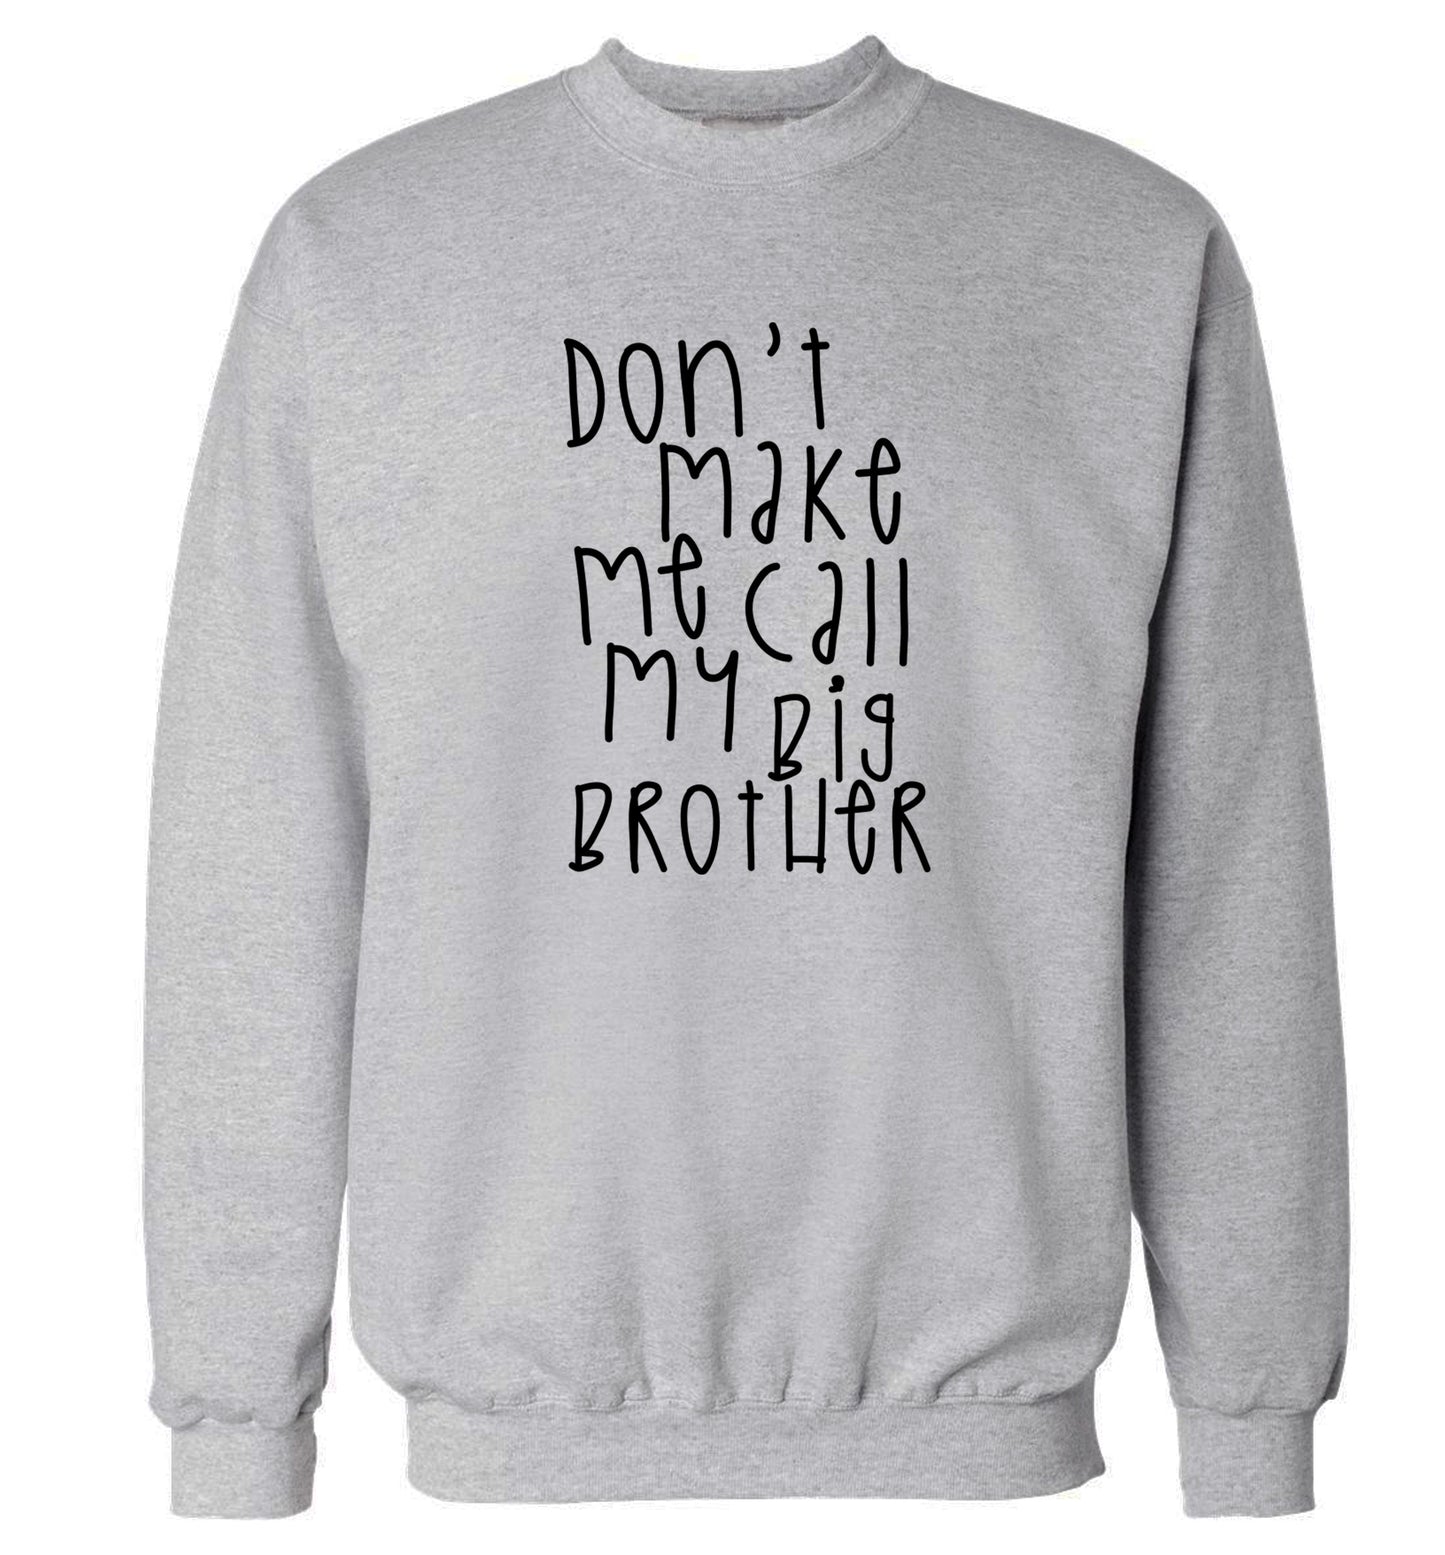 Don't make me call my big brother Adult's unisex grey Sweater 2XL